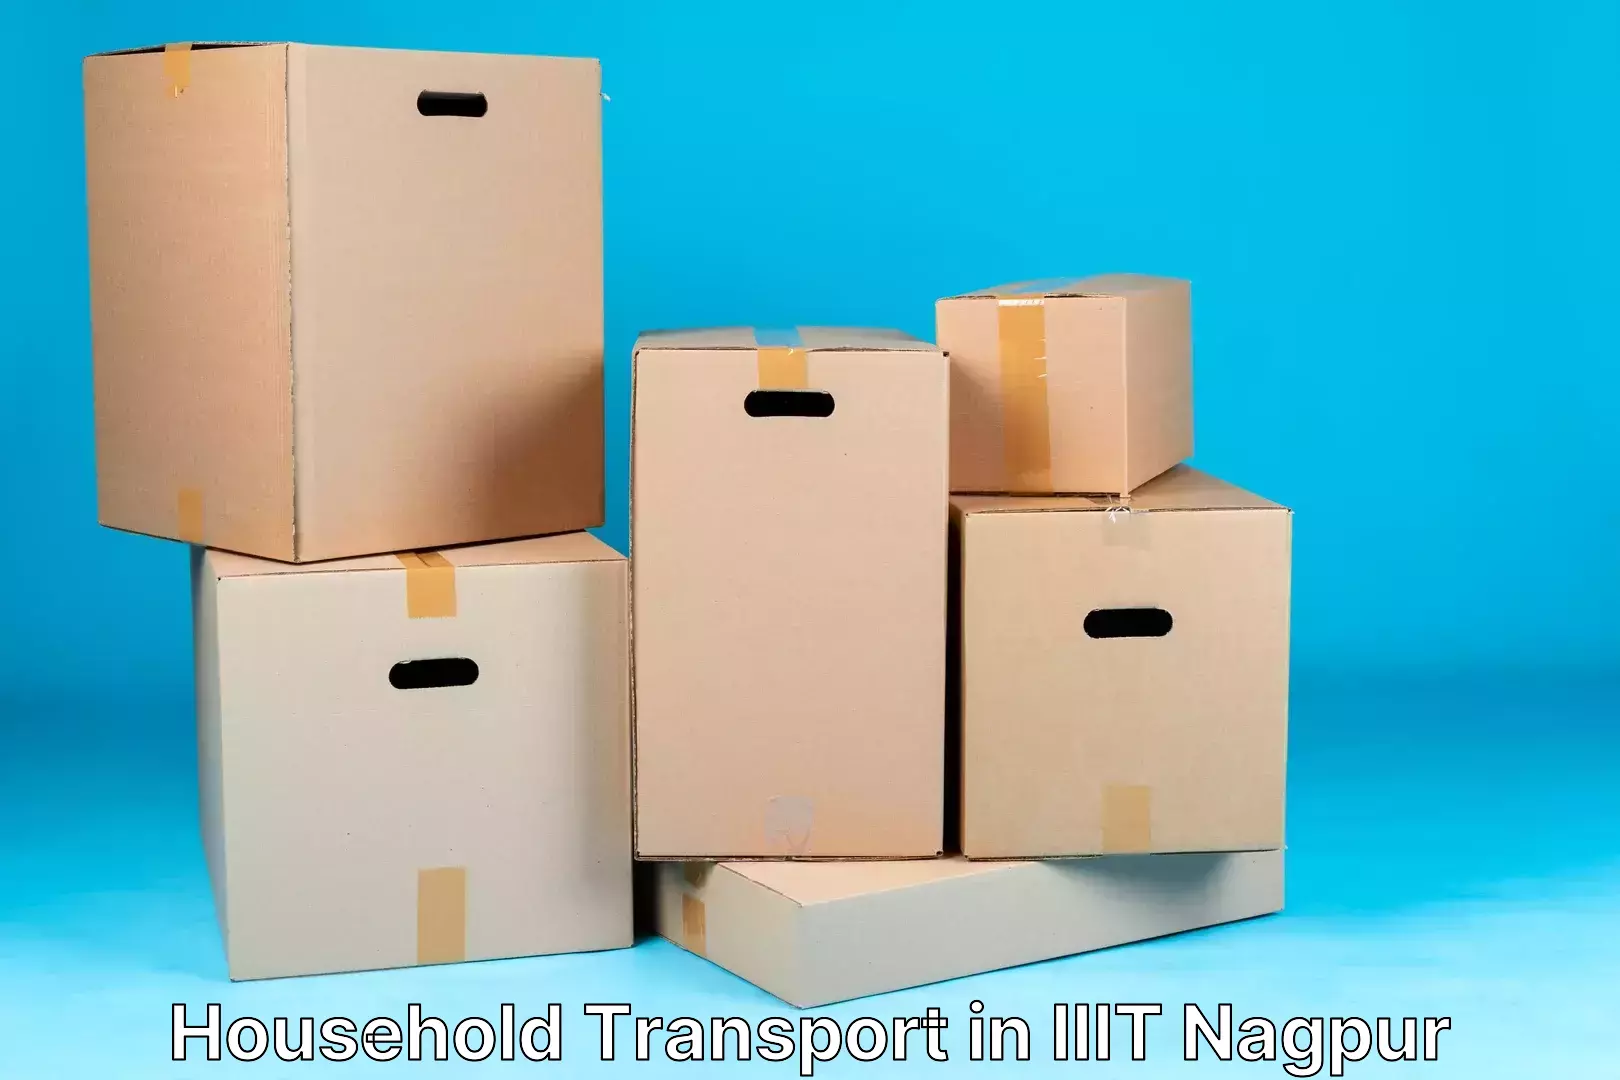 Furniture transport and storage in IIIT Nagpur